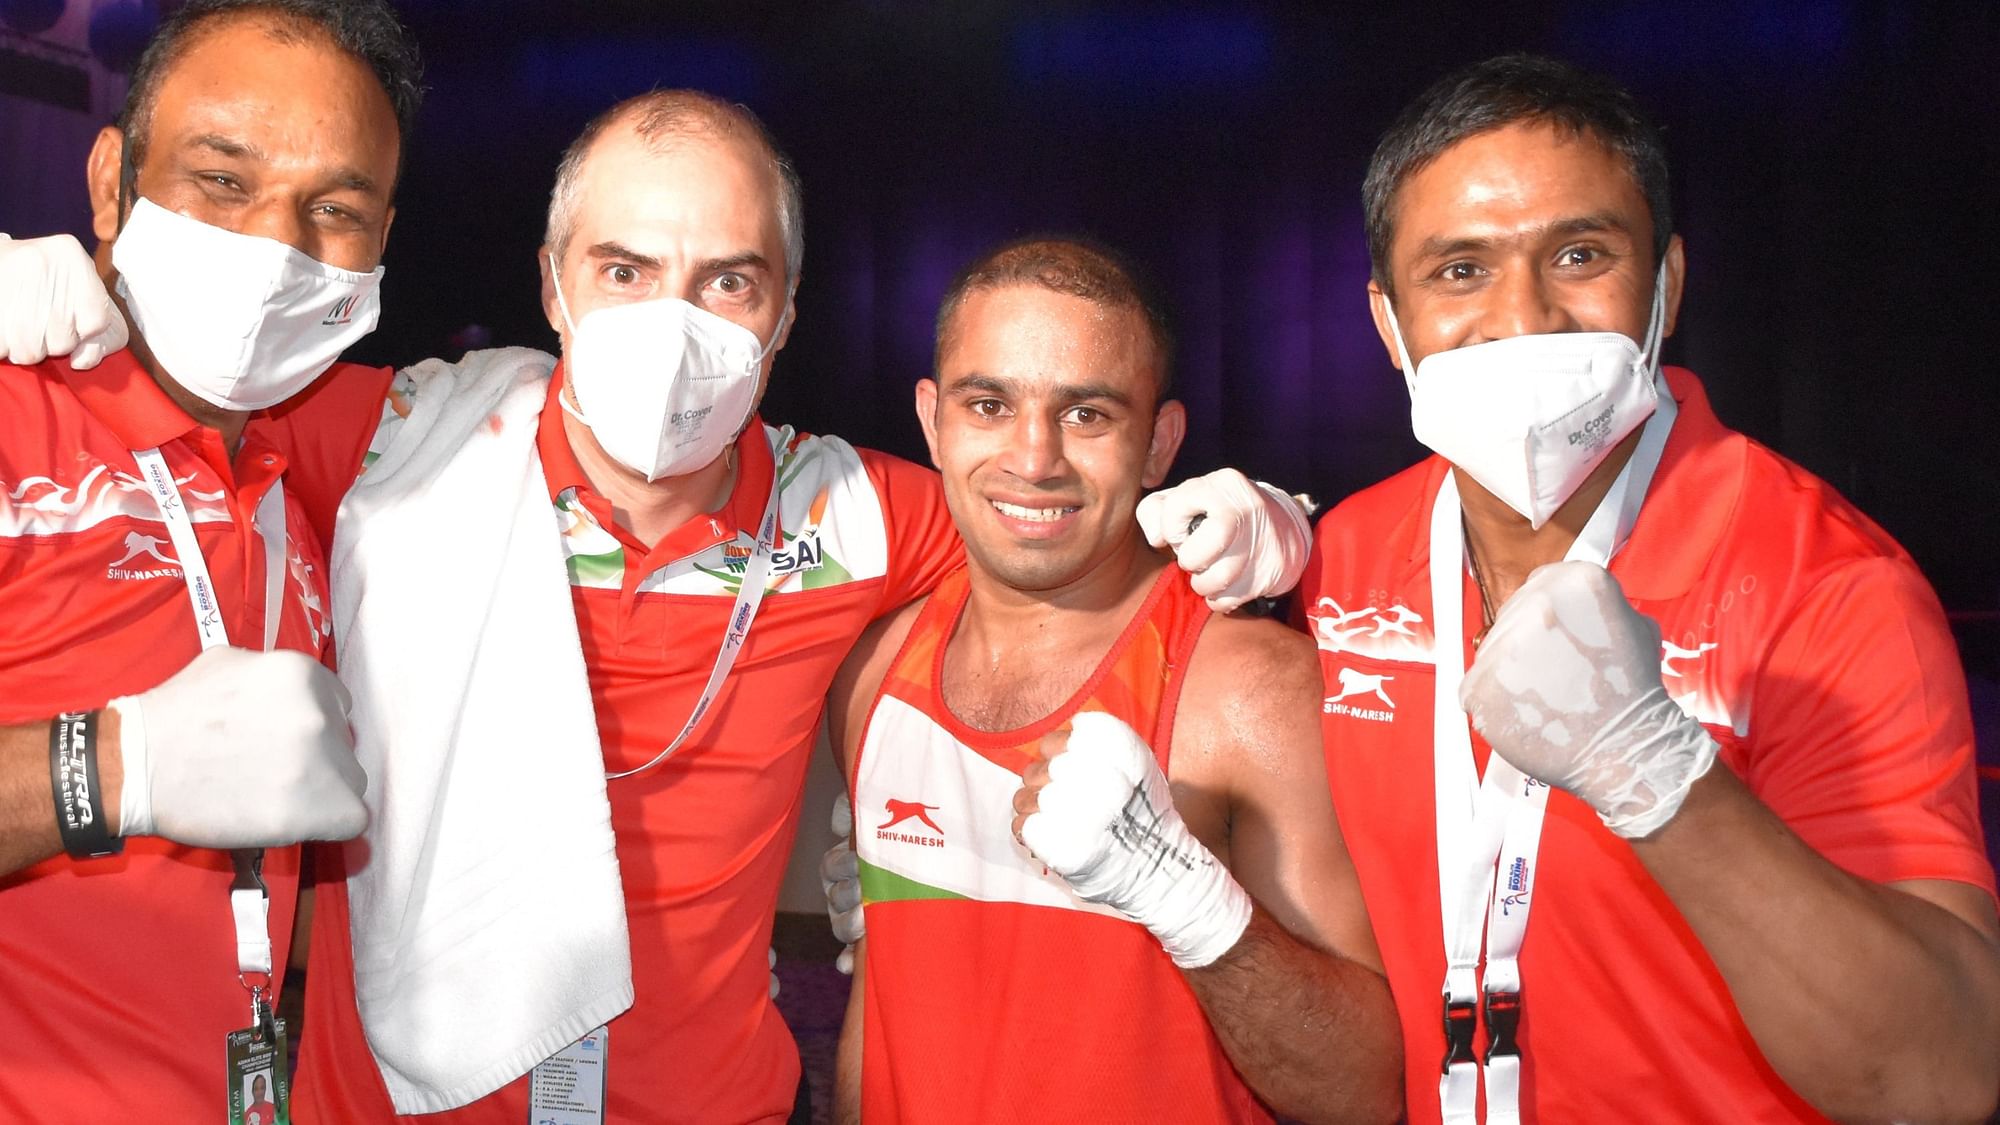 Amit Panghal with his team after entering the final of the 54kg category at the Asian Boxing Championship in Dubai on Friday night.